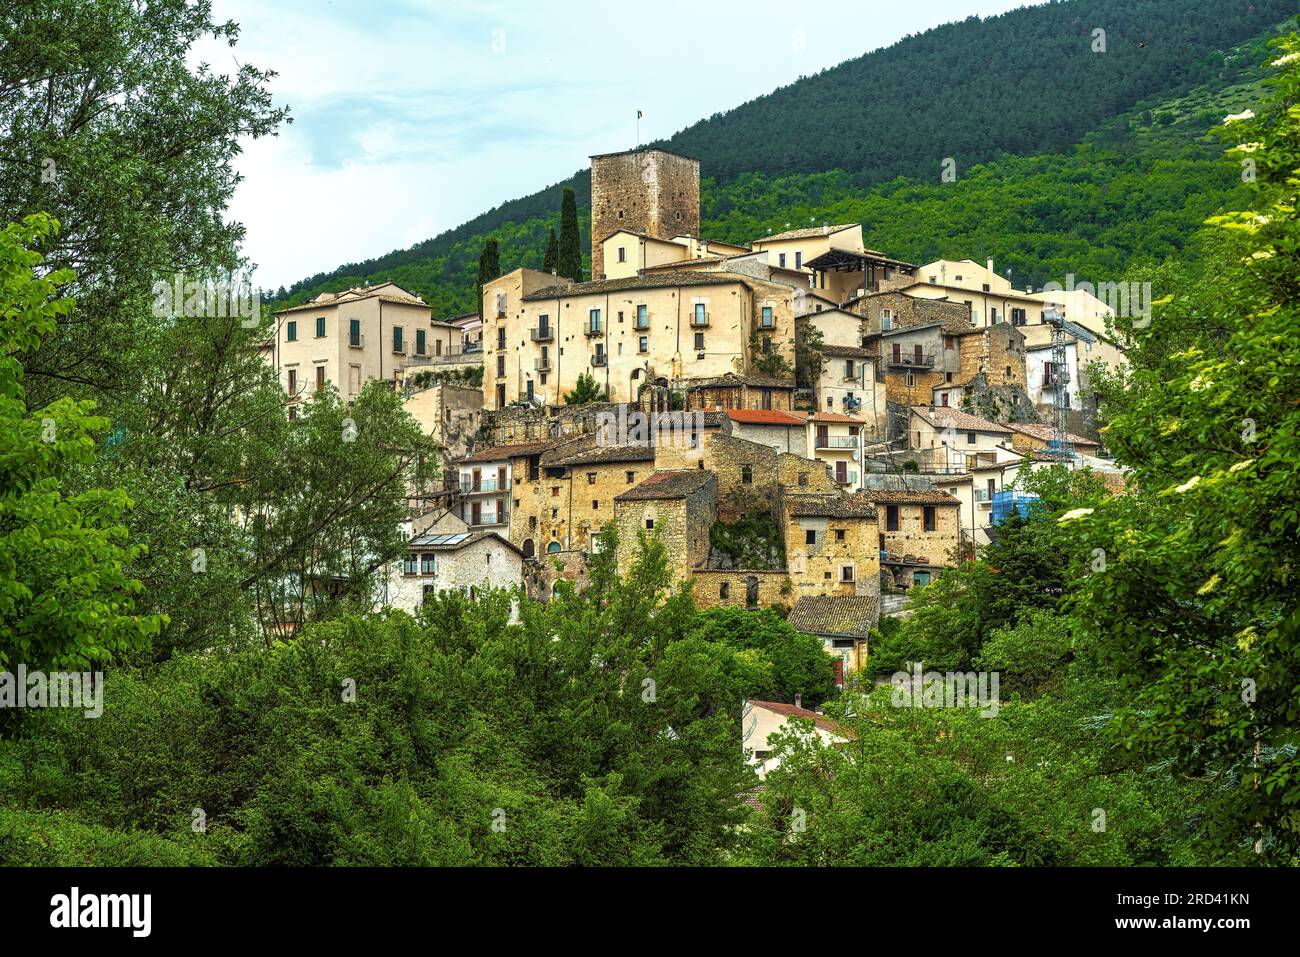 the small village of Castel di Ieri placed among the mountains of the Regional Natural Park of Sirente Velino in the Subequana Valley Stock Photo